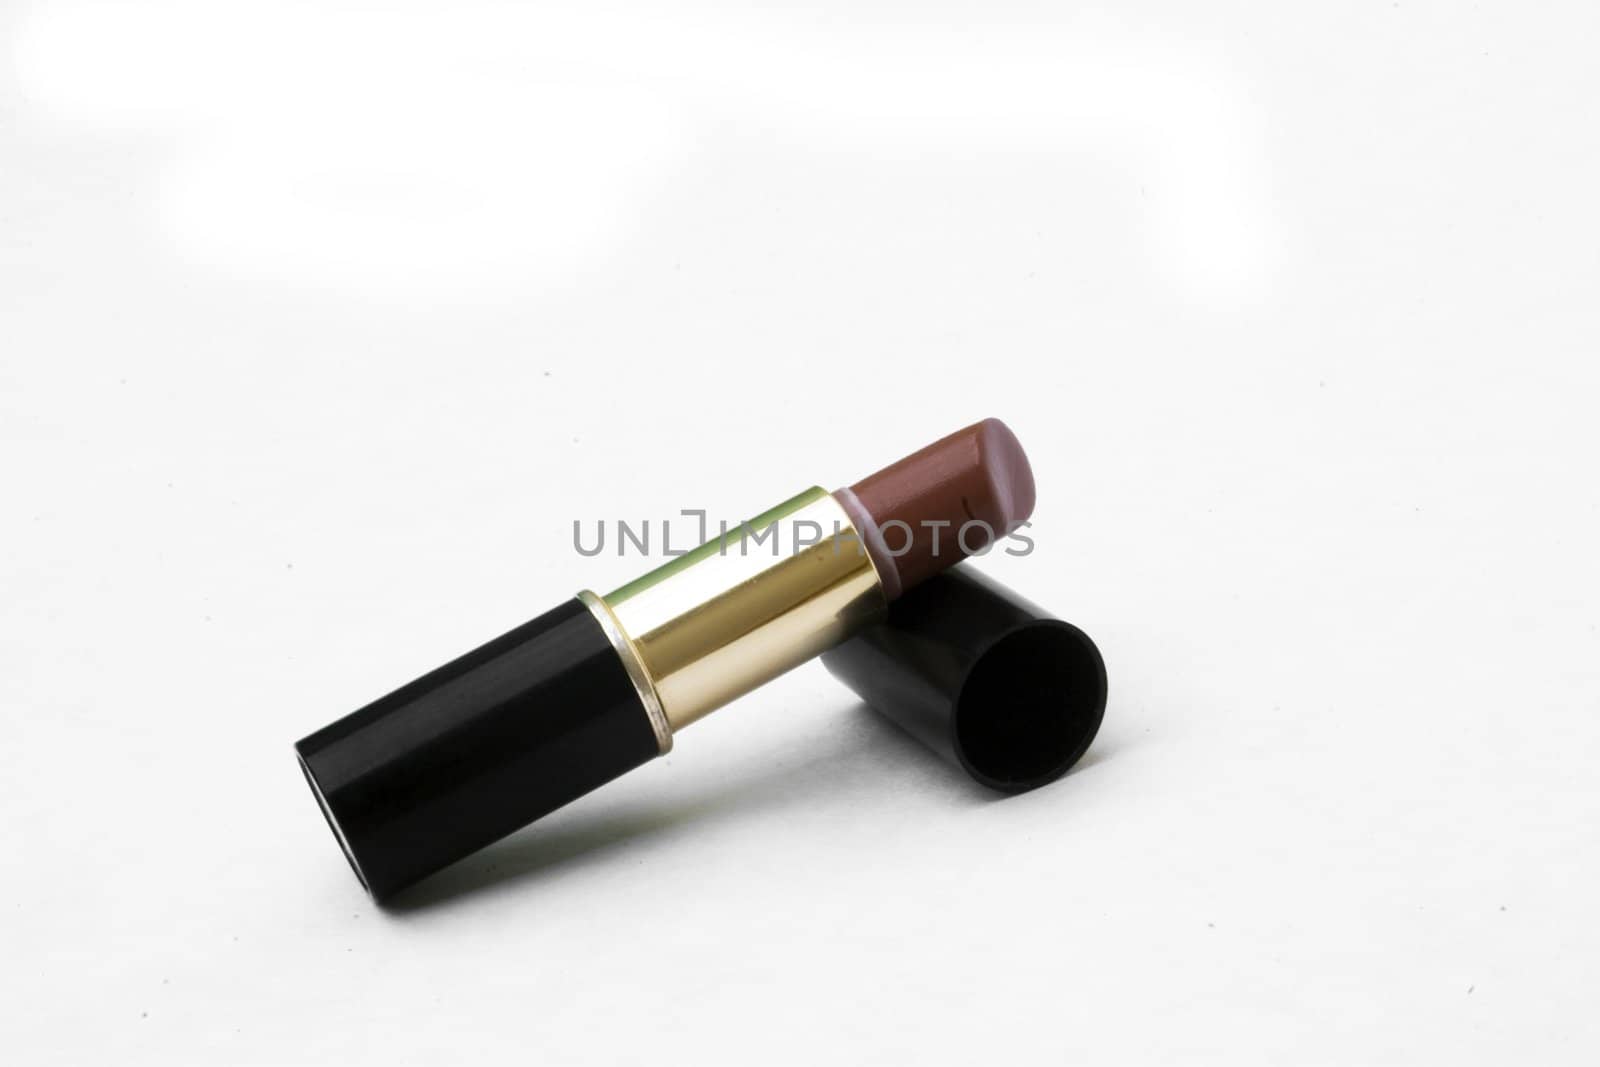 Maroon lipstick with lid off isolated against white background